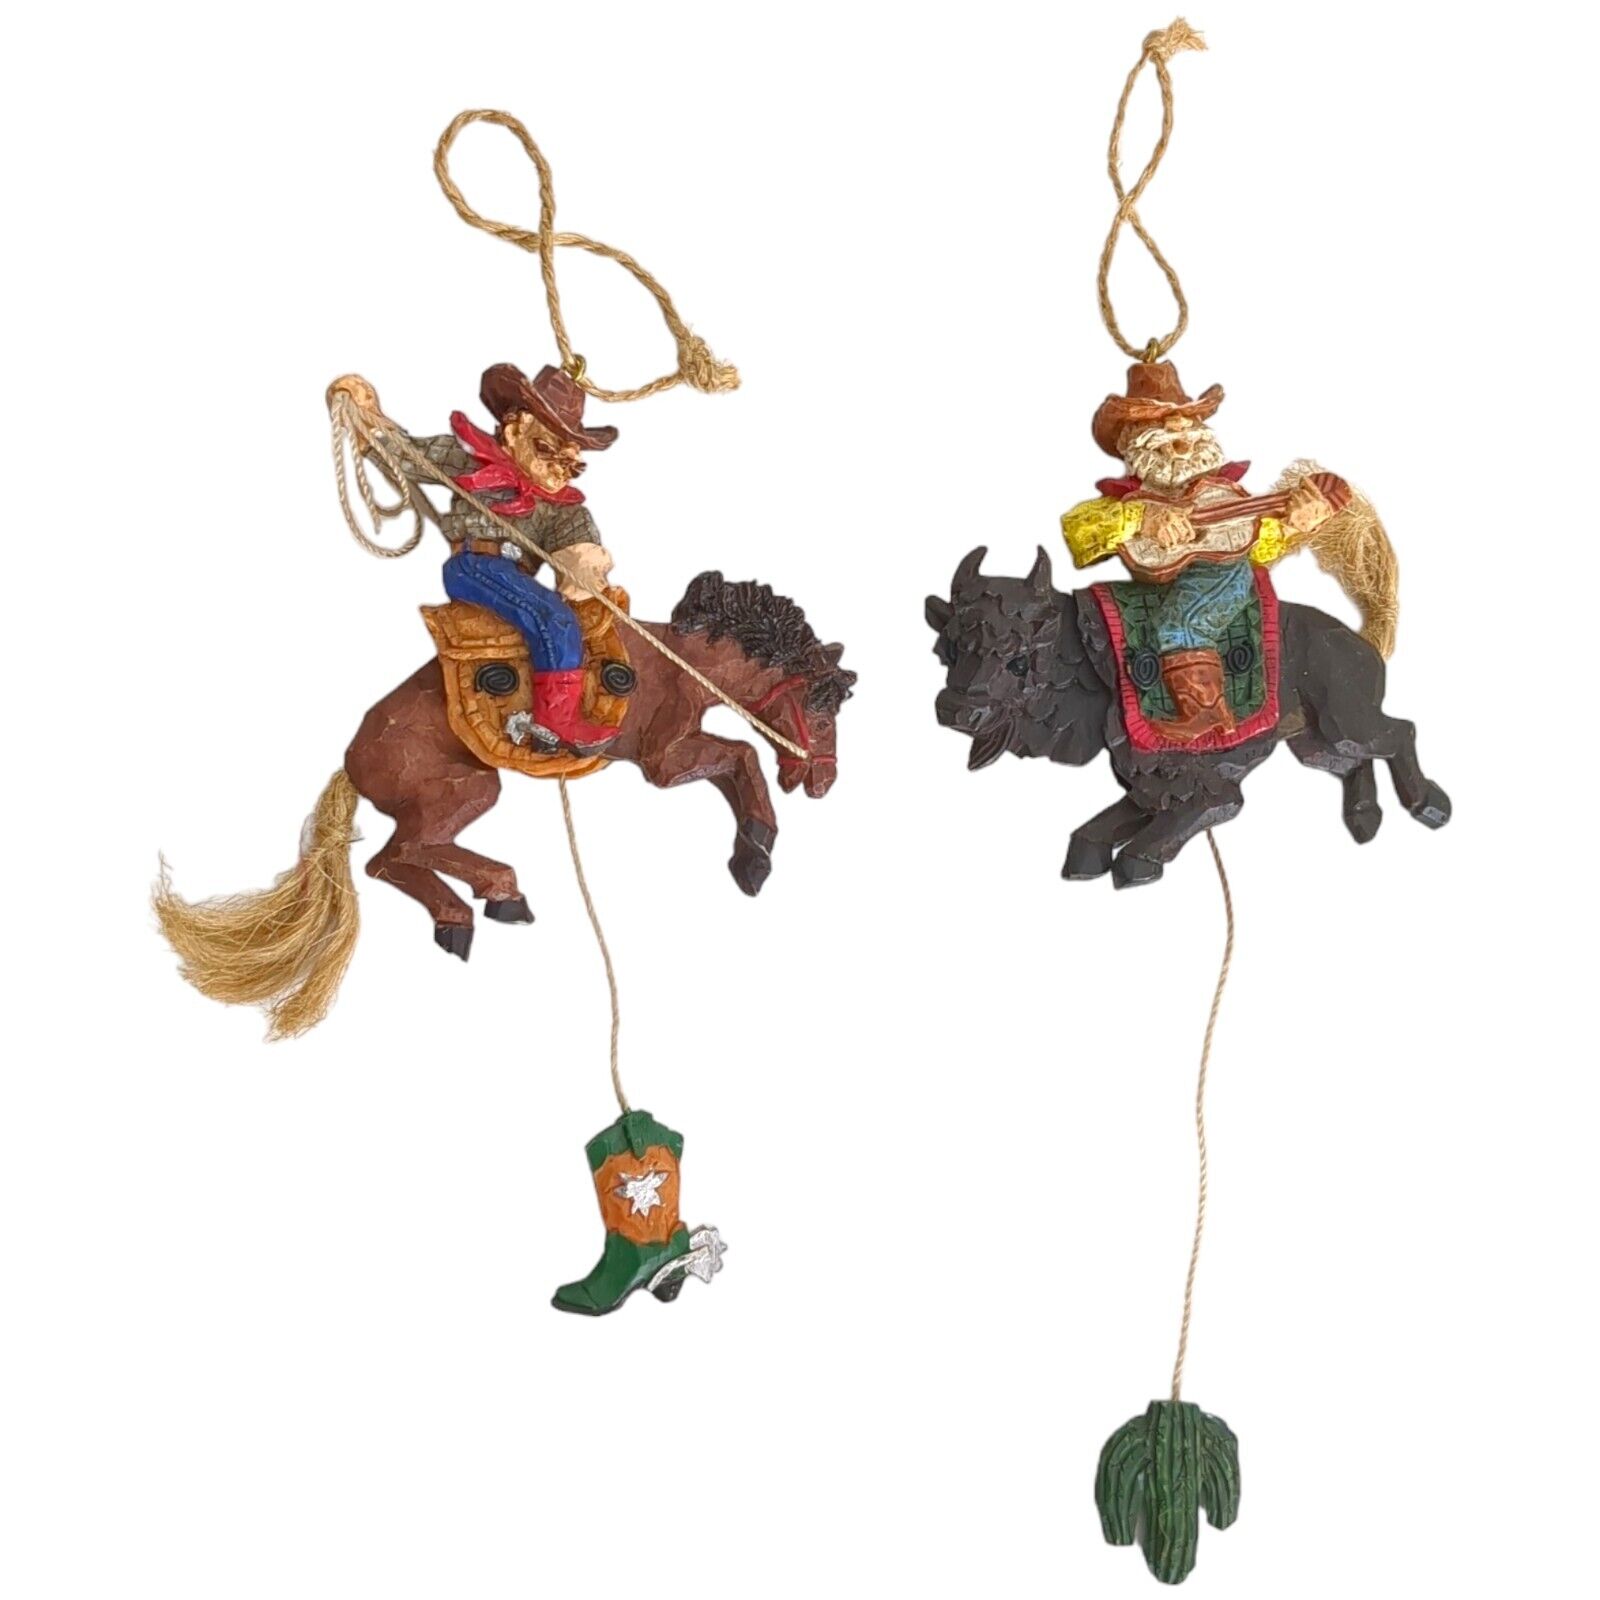 Lot of 2 RESIN JOINTED BUCKING BRONCO HORSE CHRISTMAS Ornament W/ COWBOY SANTA